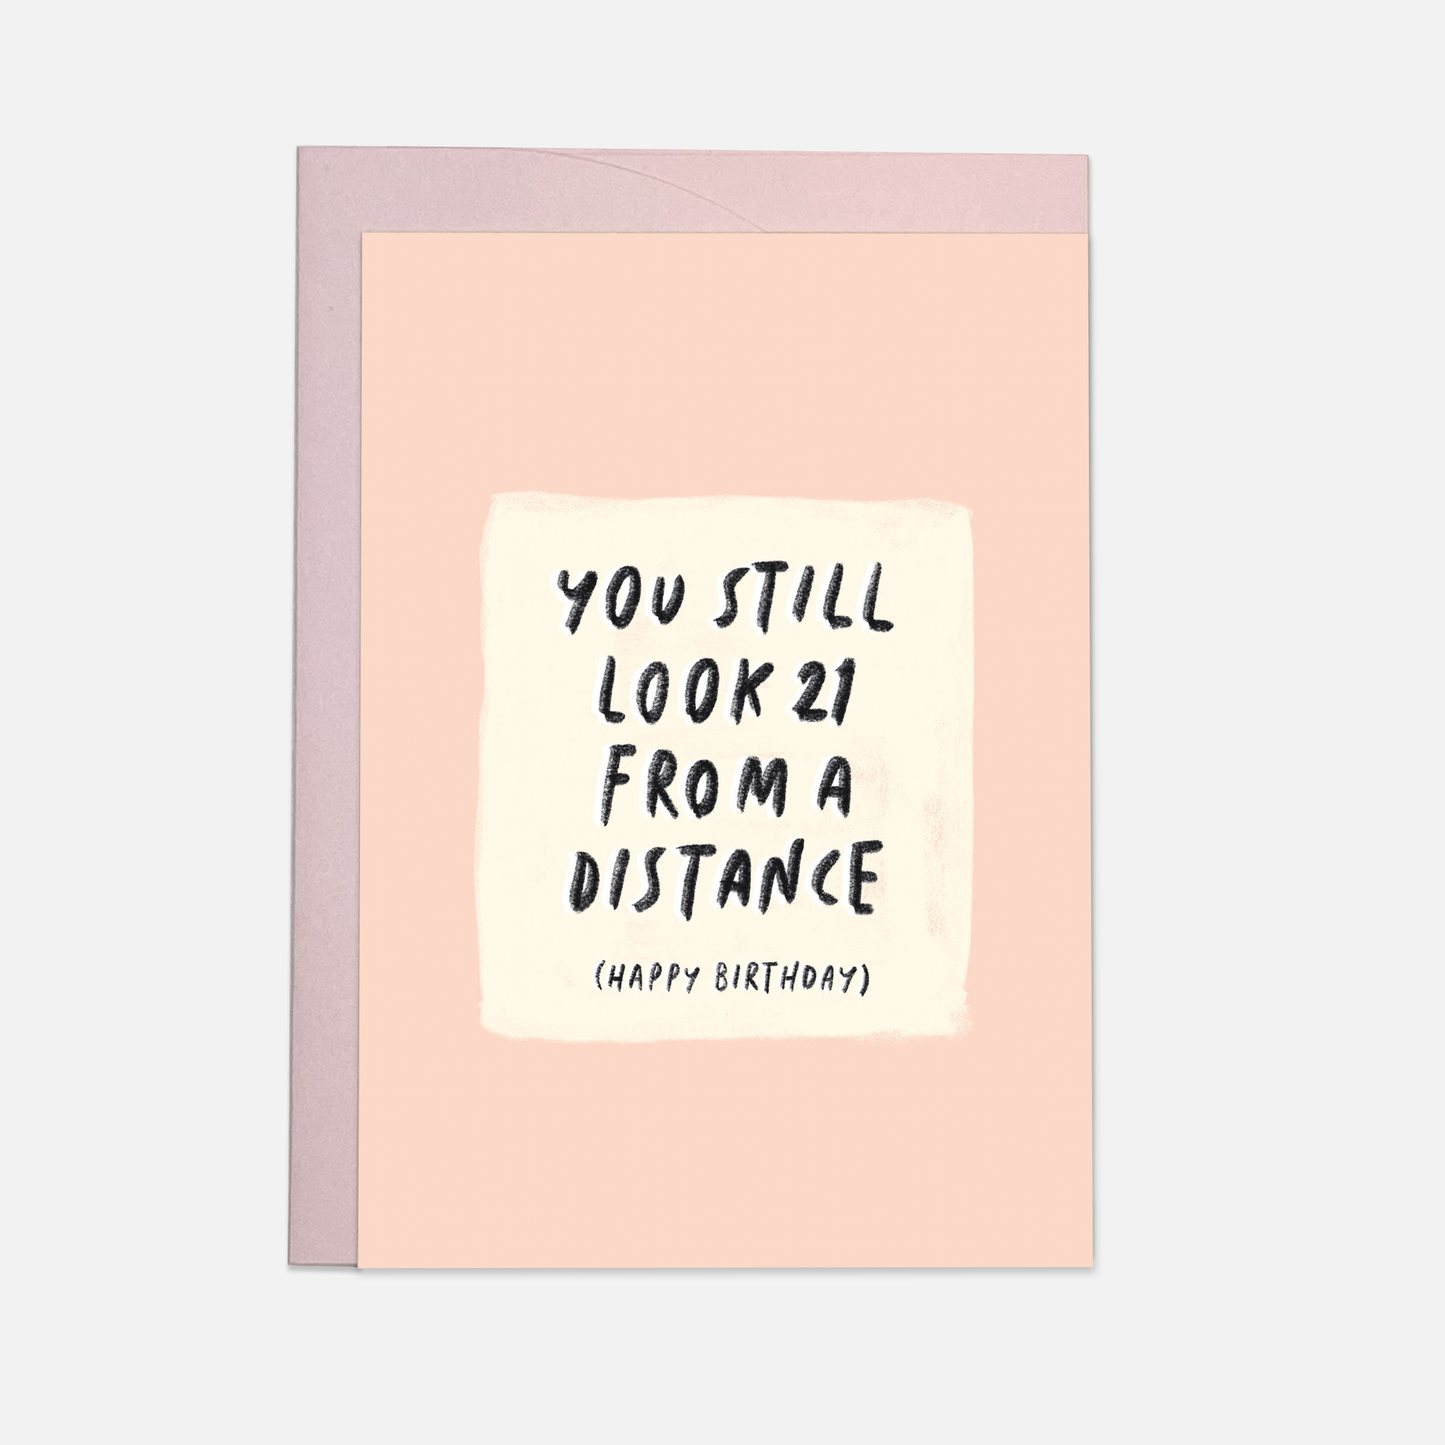 21 distance greeting card